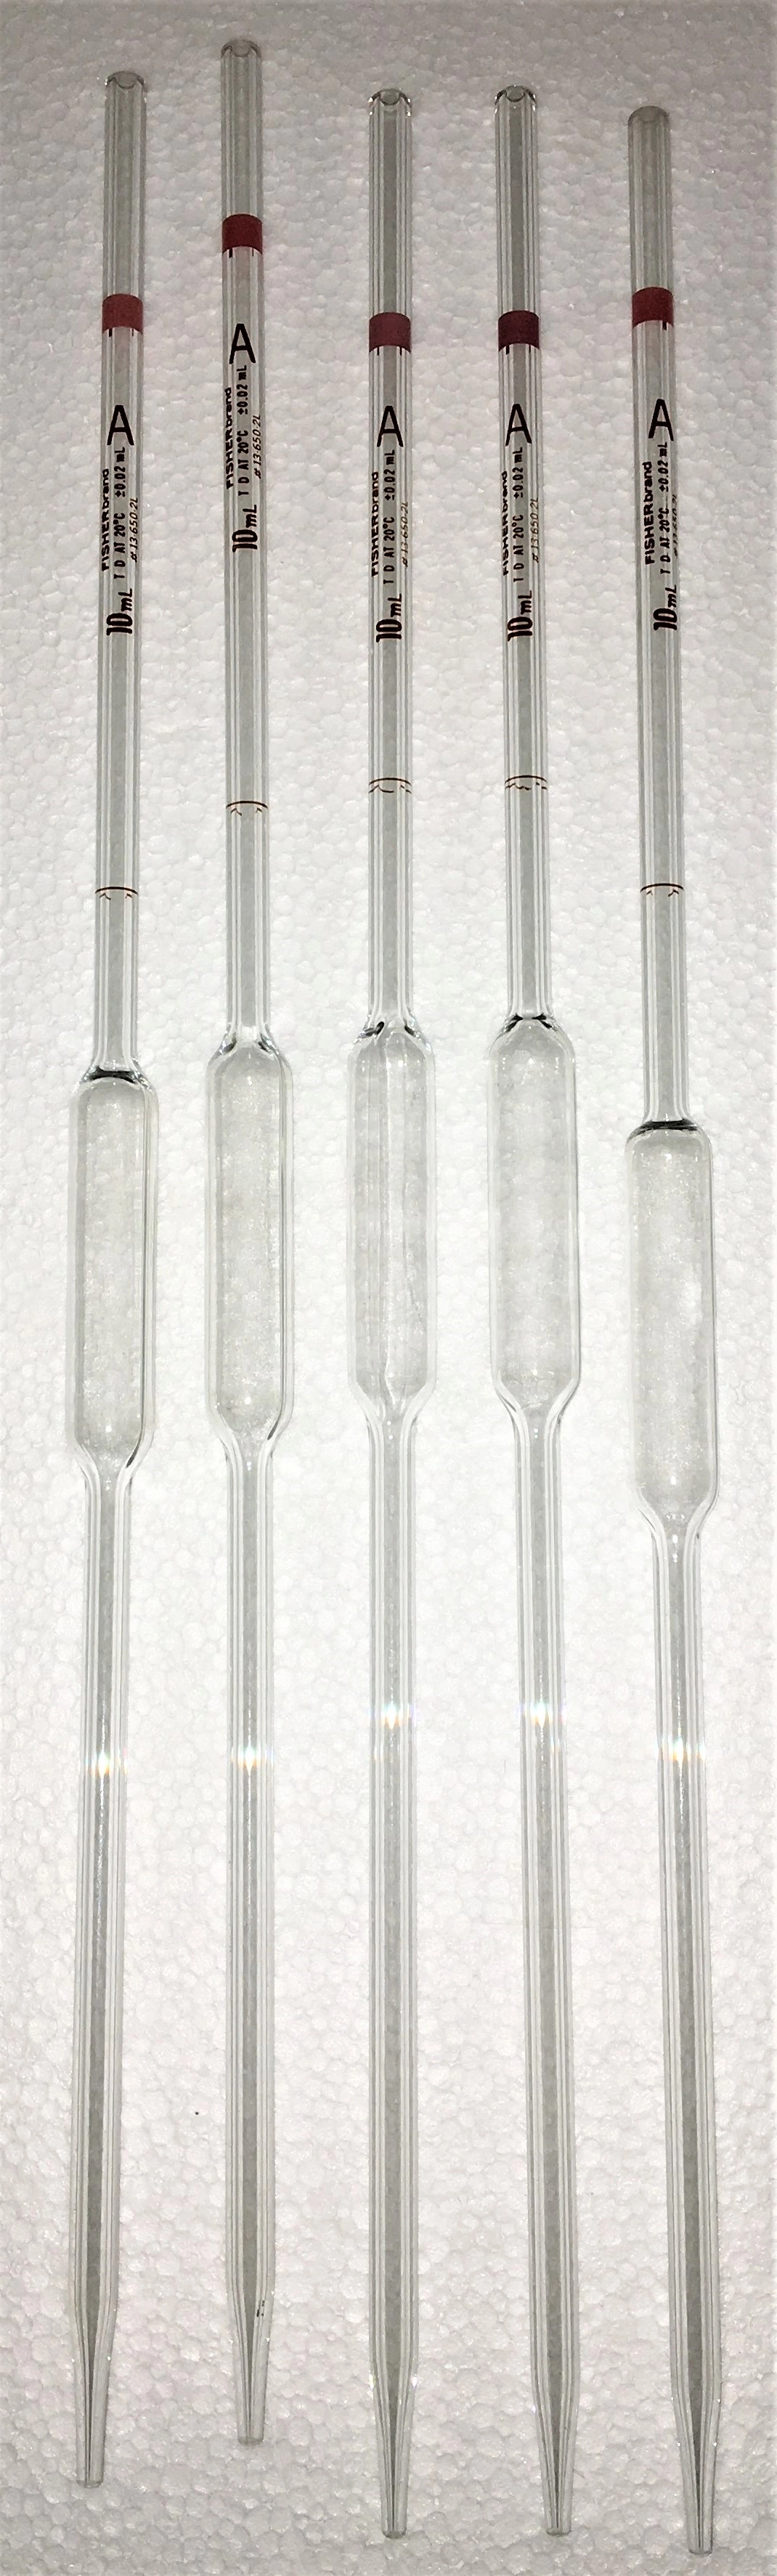 Fisherbrand 13-650-2L Volumetric Pipet, Class A - 10mL (Pack of 12)